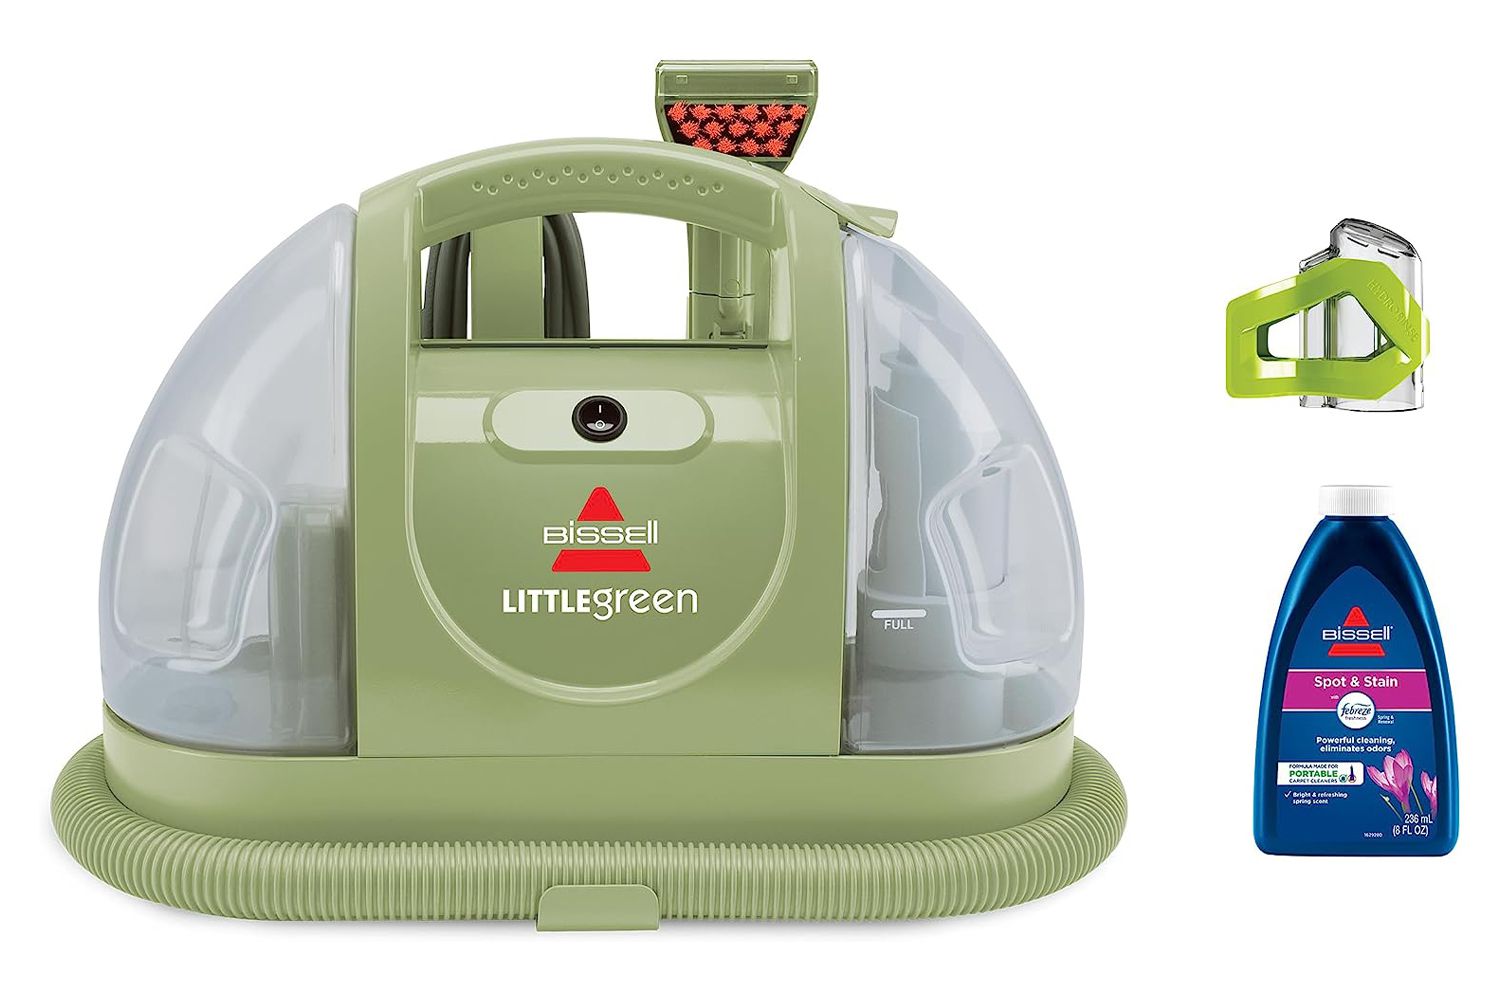 Amazon Prime Day BISSELL Little Green Multi-Purpose Portable Carpet and Upholstery Cleaner, Green, 1400B